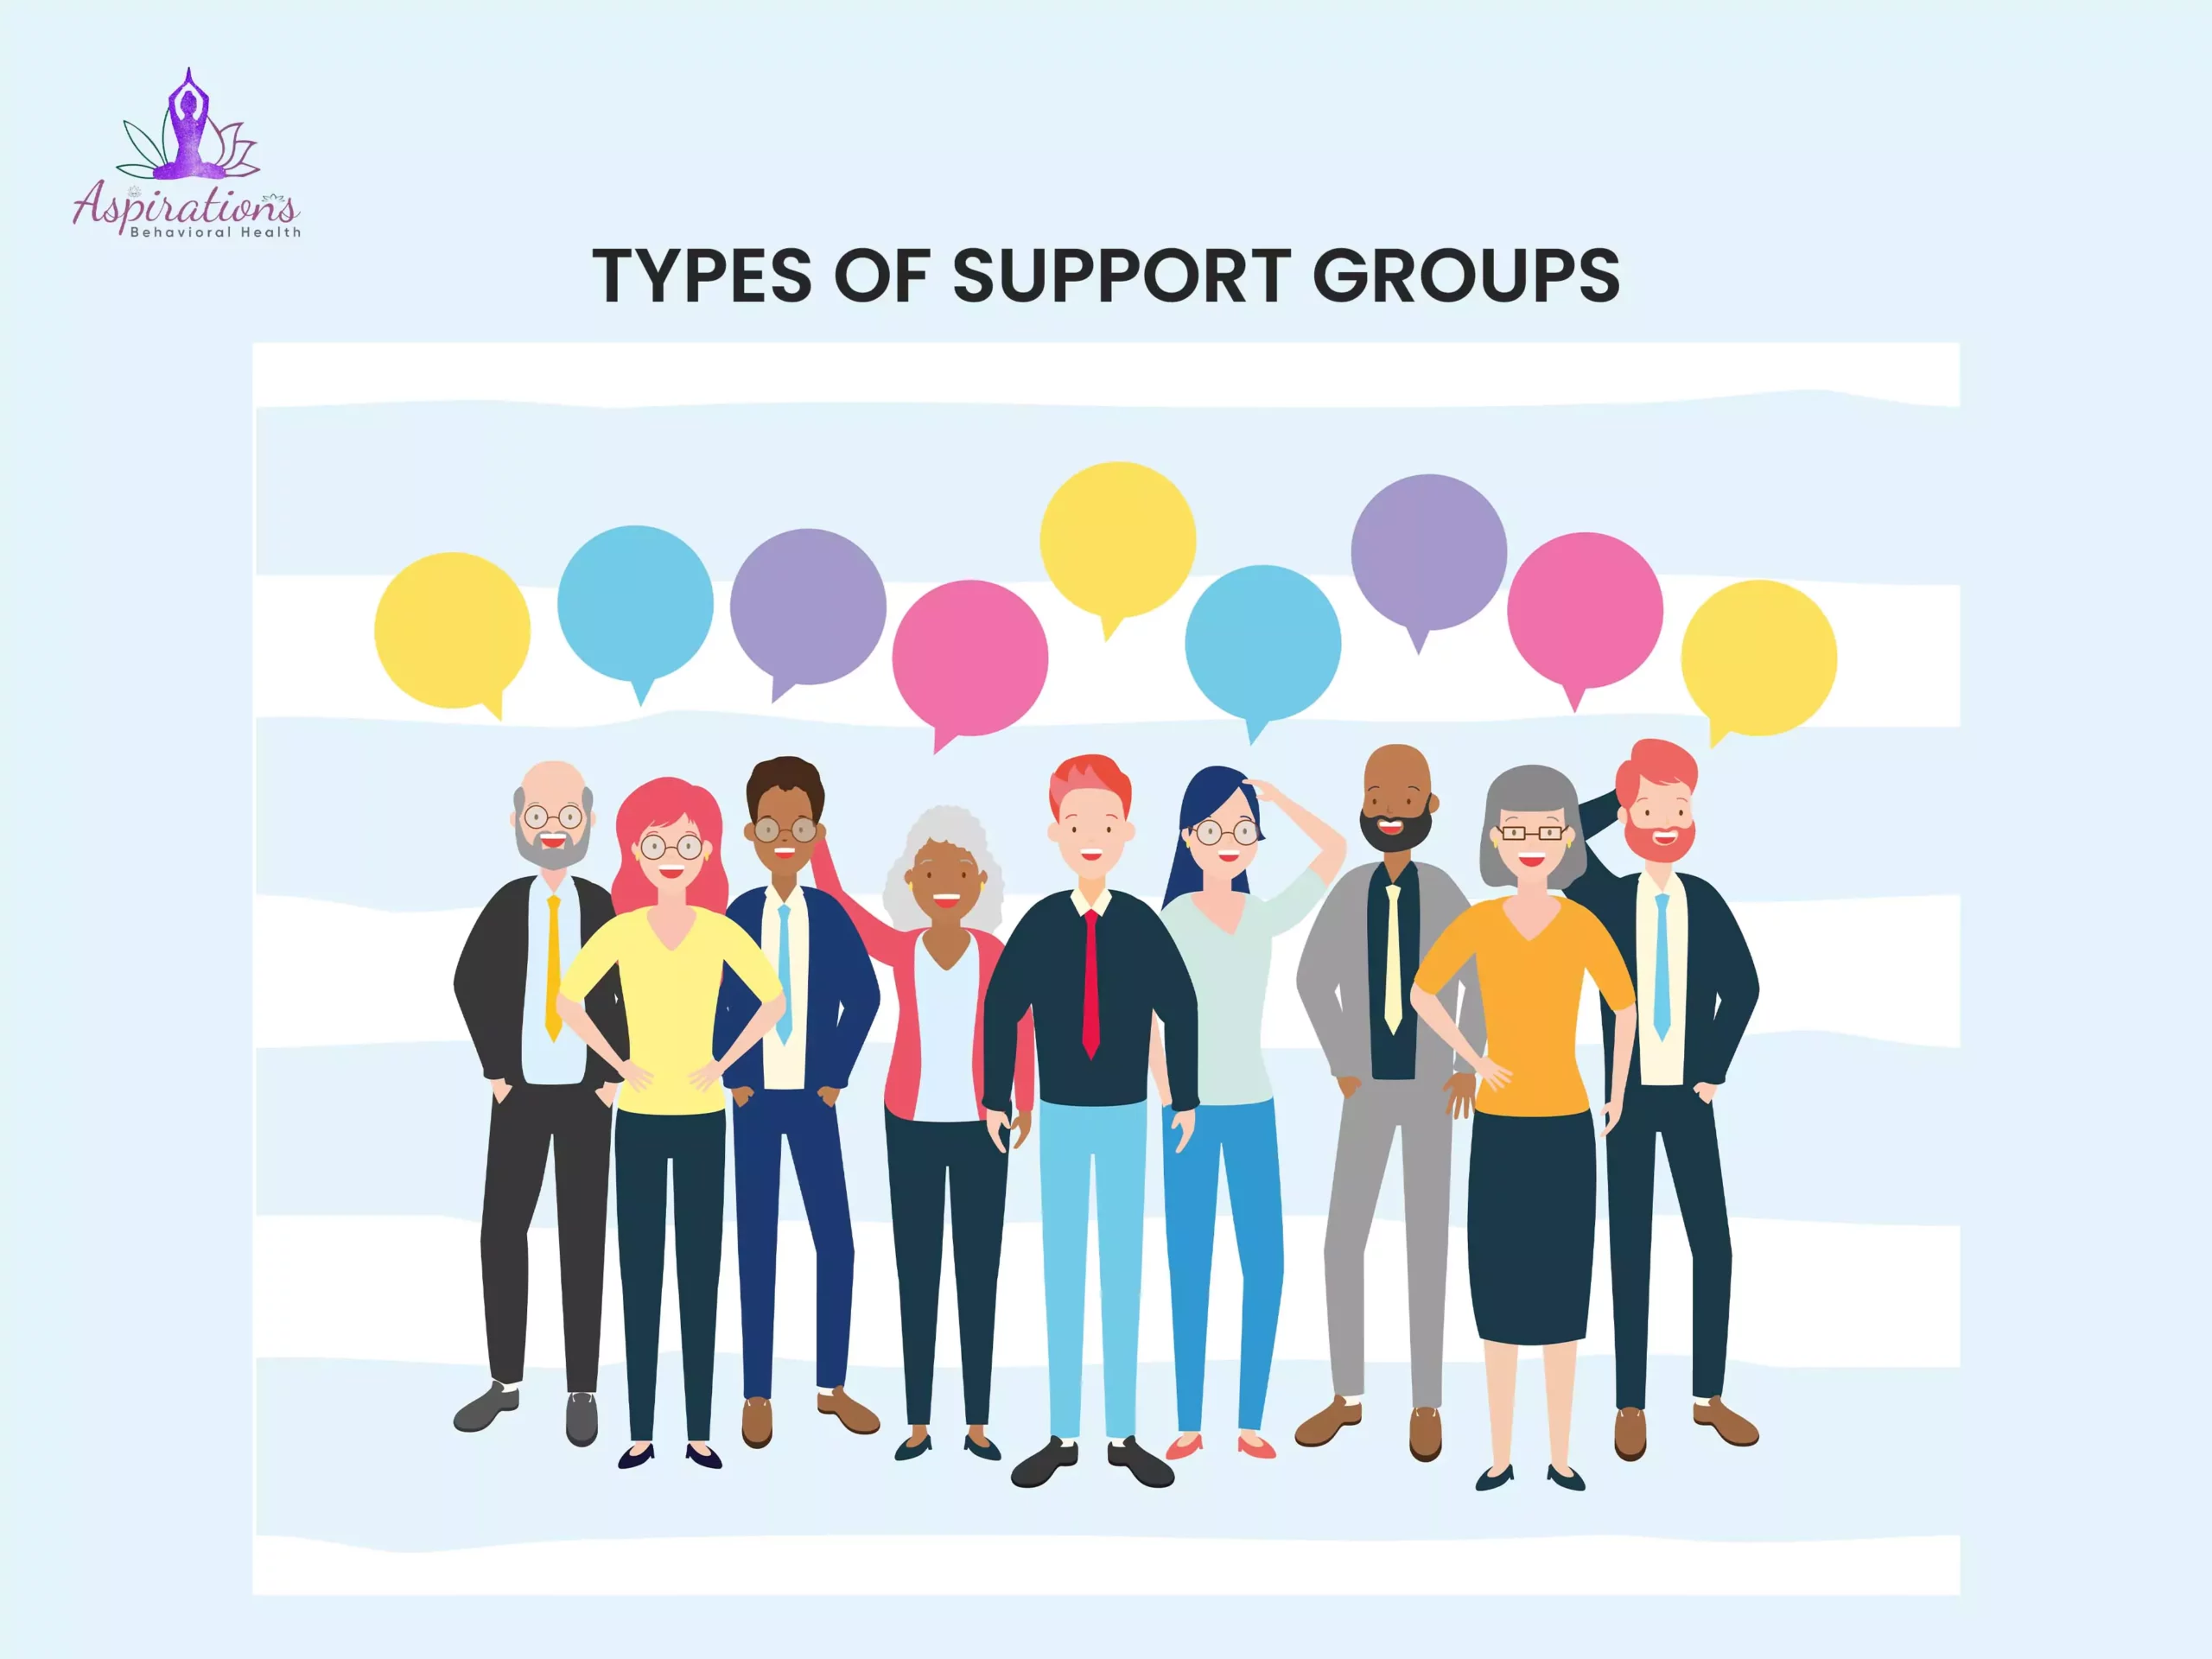 Types of Support Groups